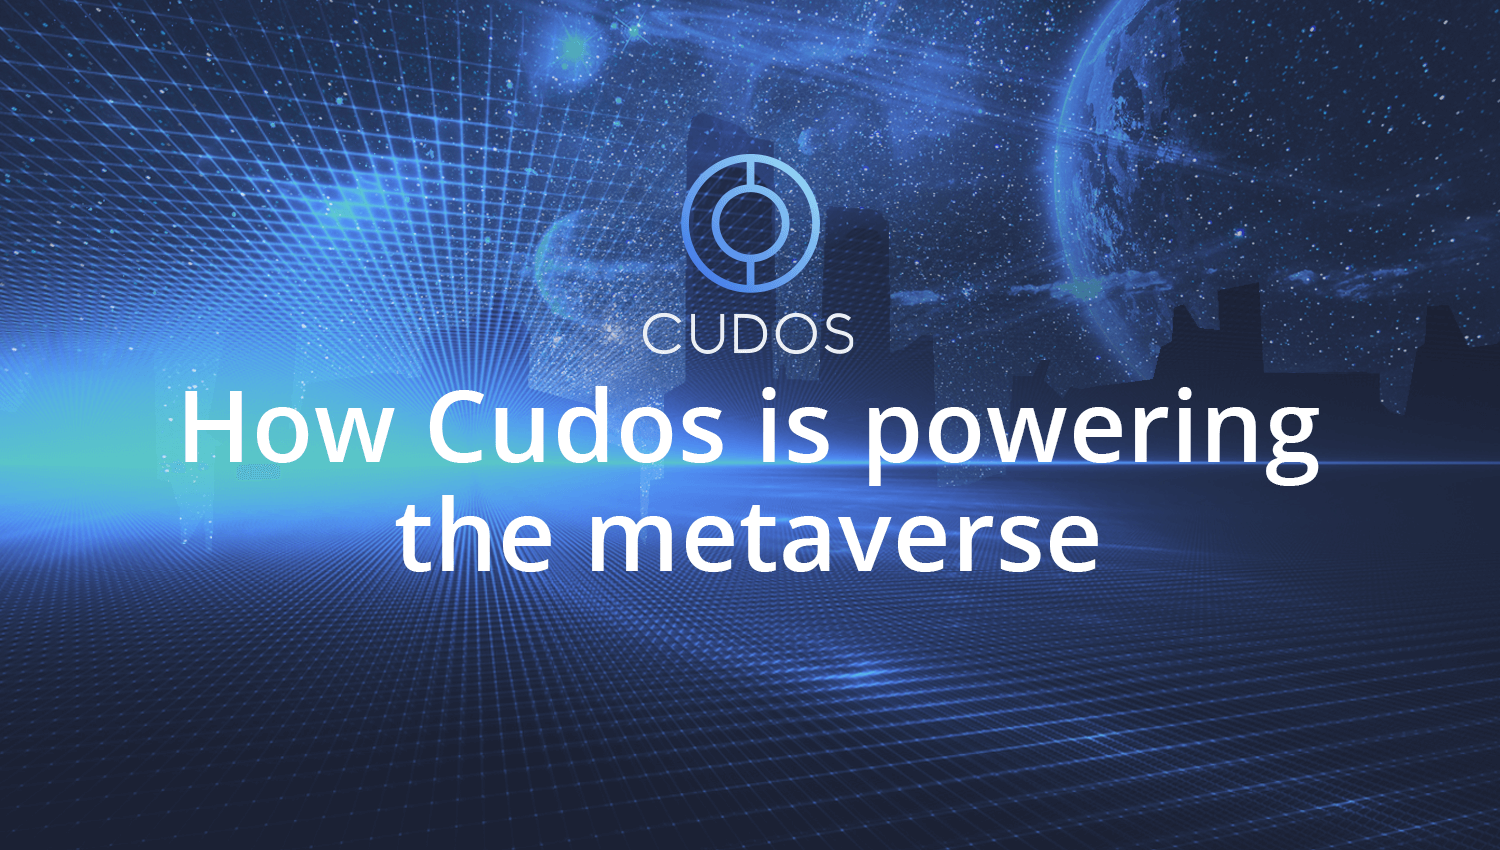 How Cudos is powering the metaverse